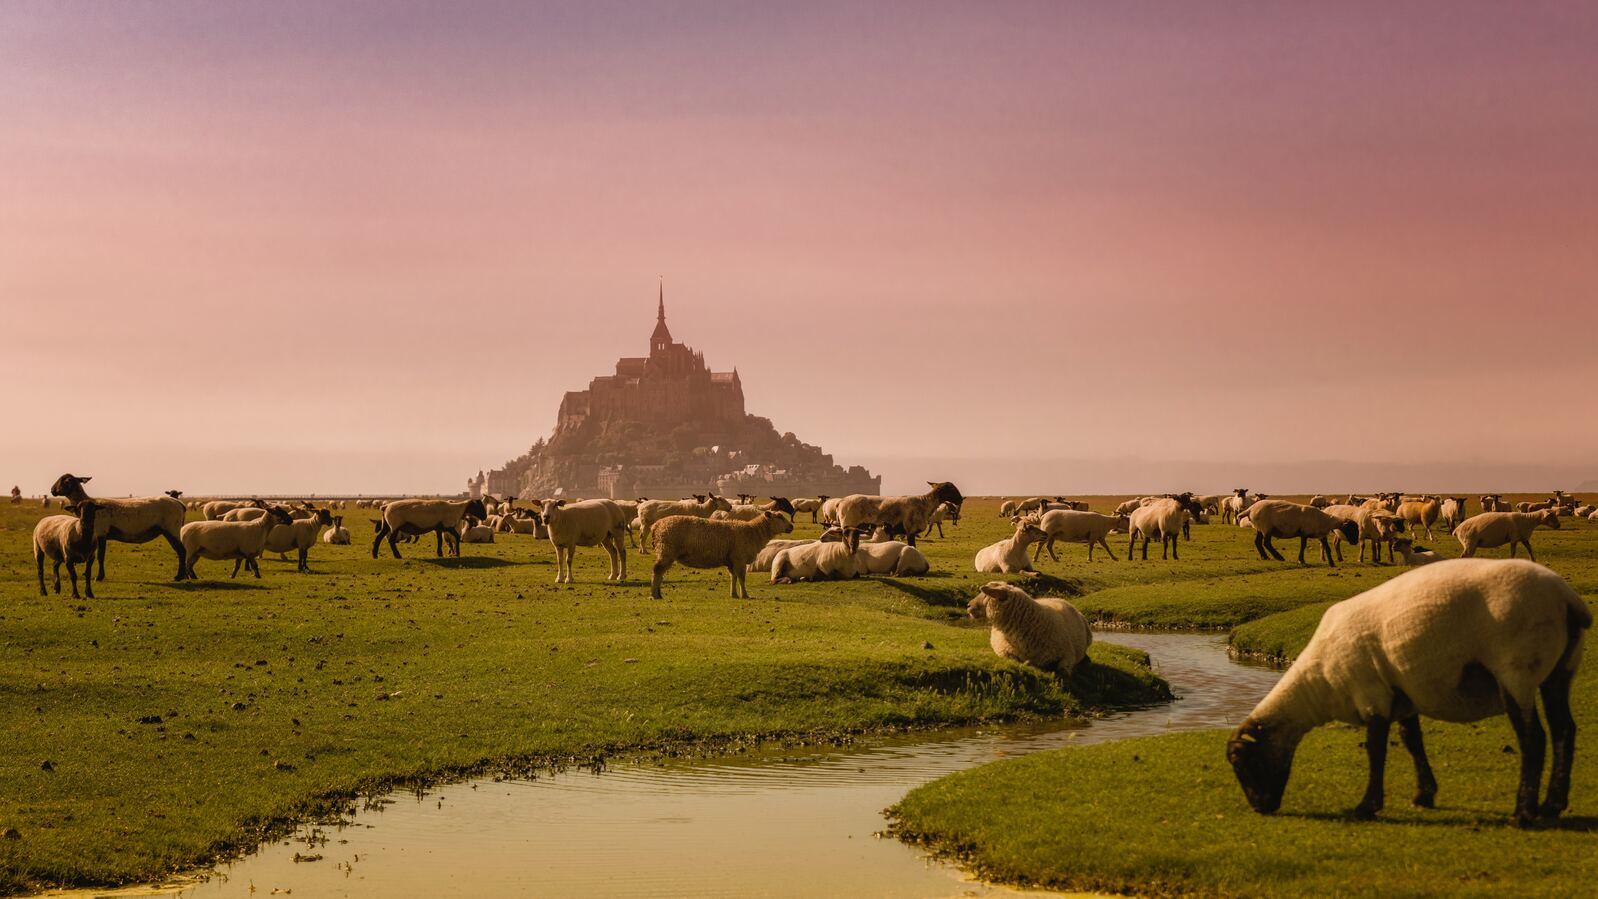 Image of Mont Saint-Michel leading lines by Team PhotoHound